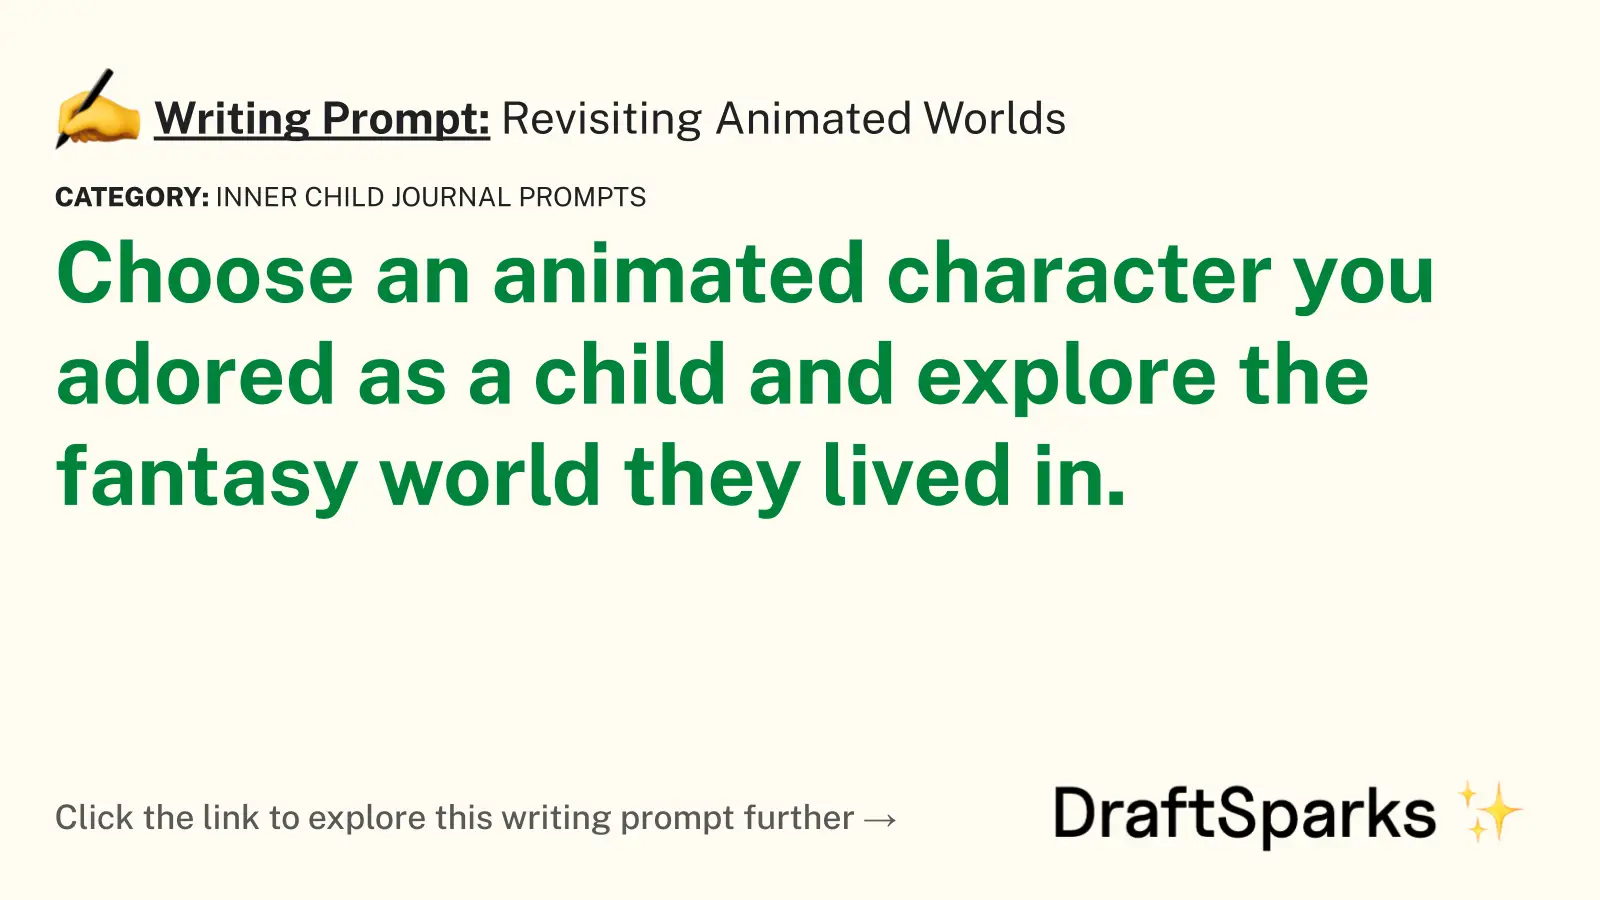 Revisiting Animated Worlds